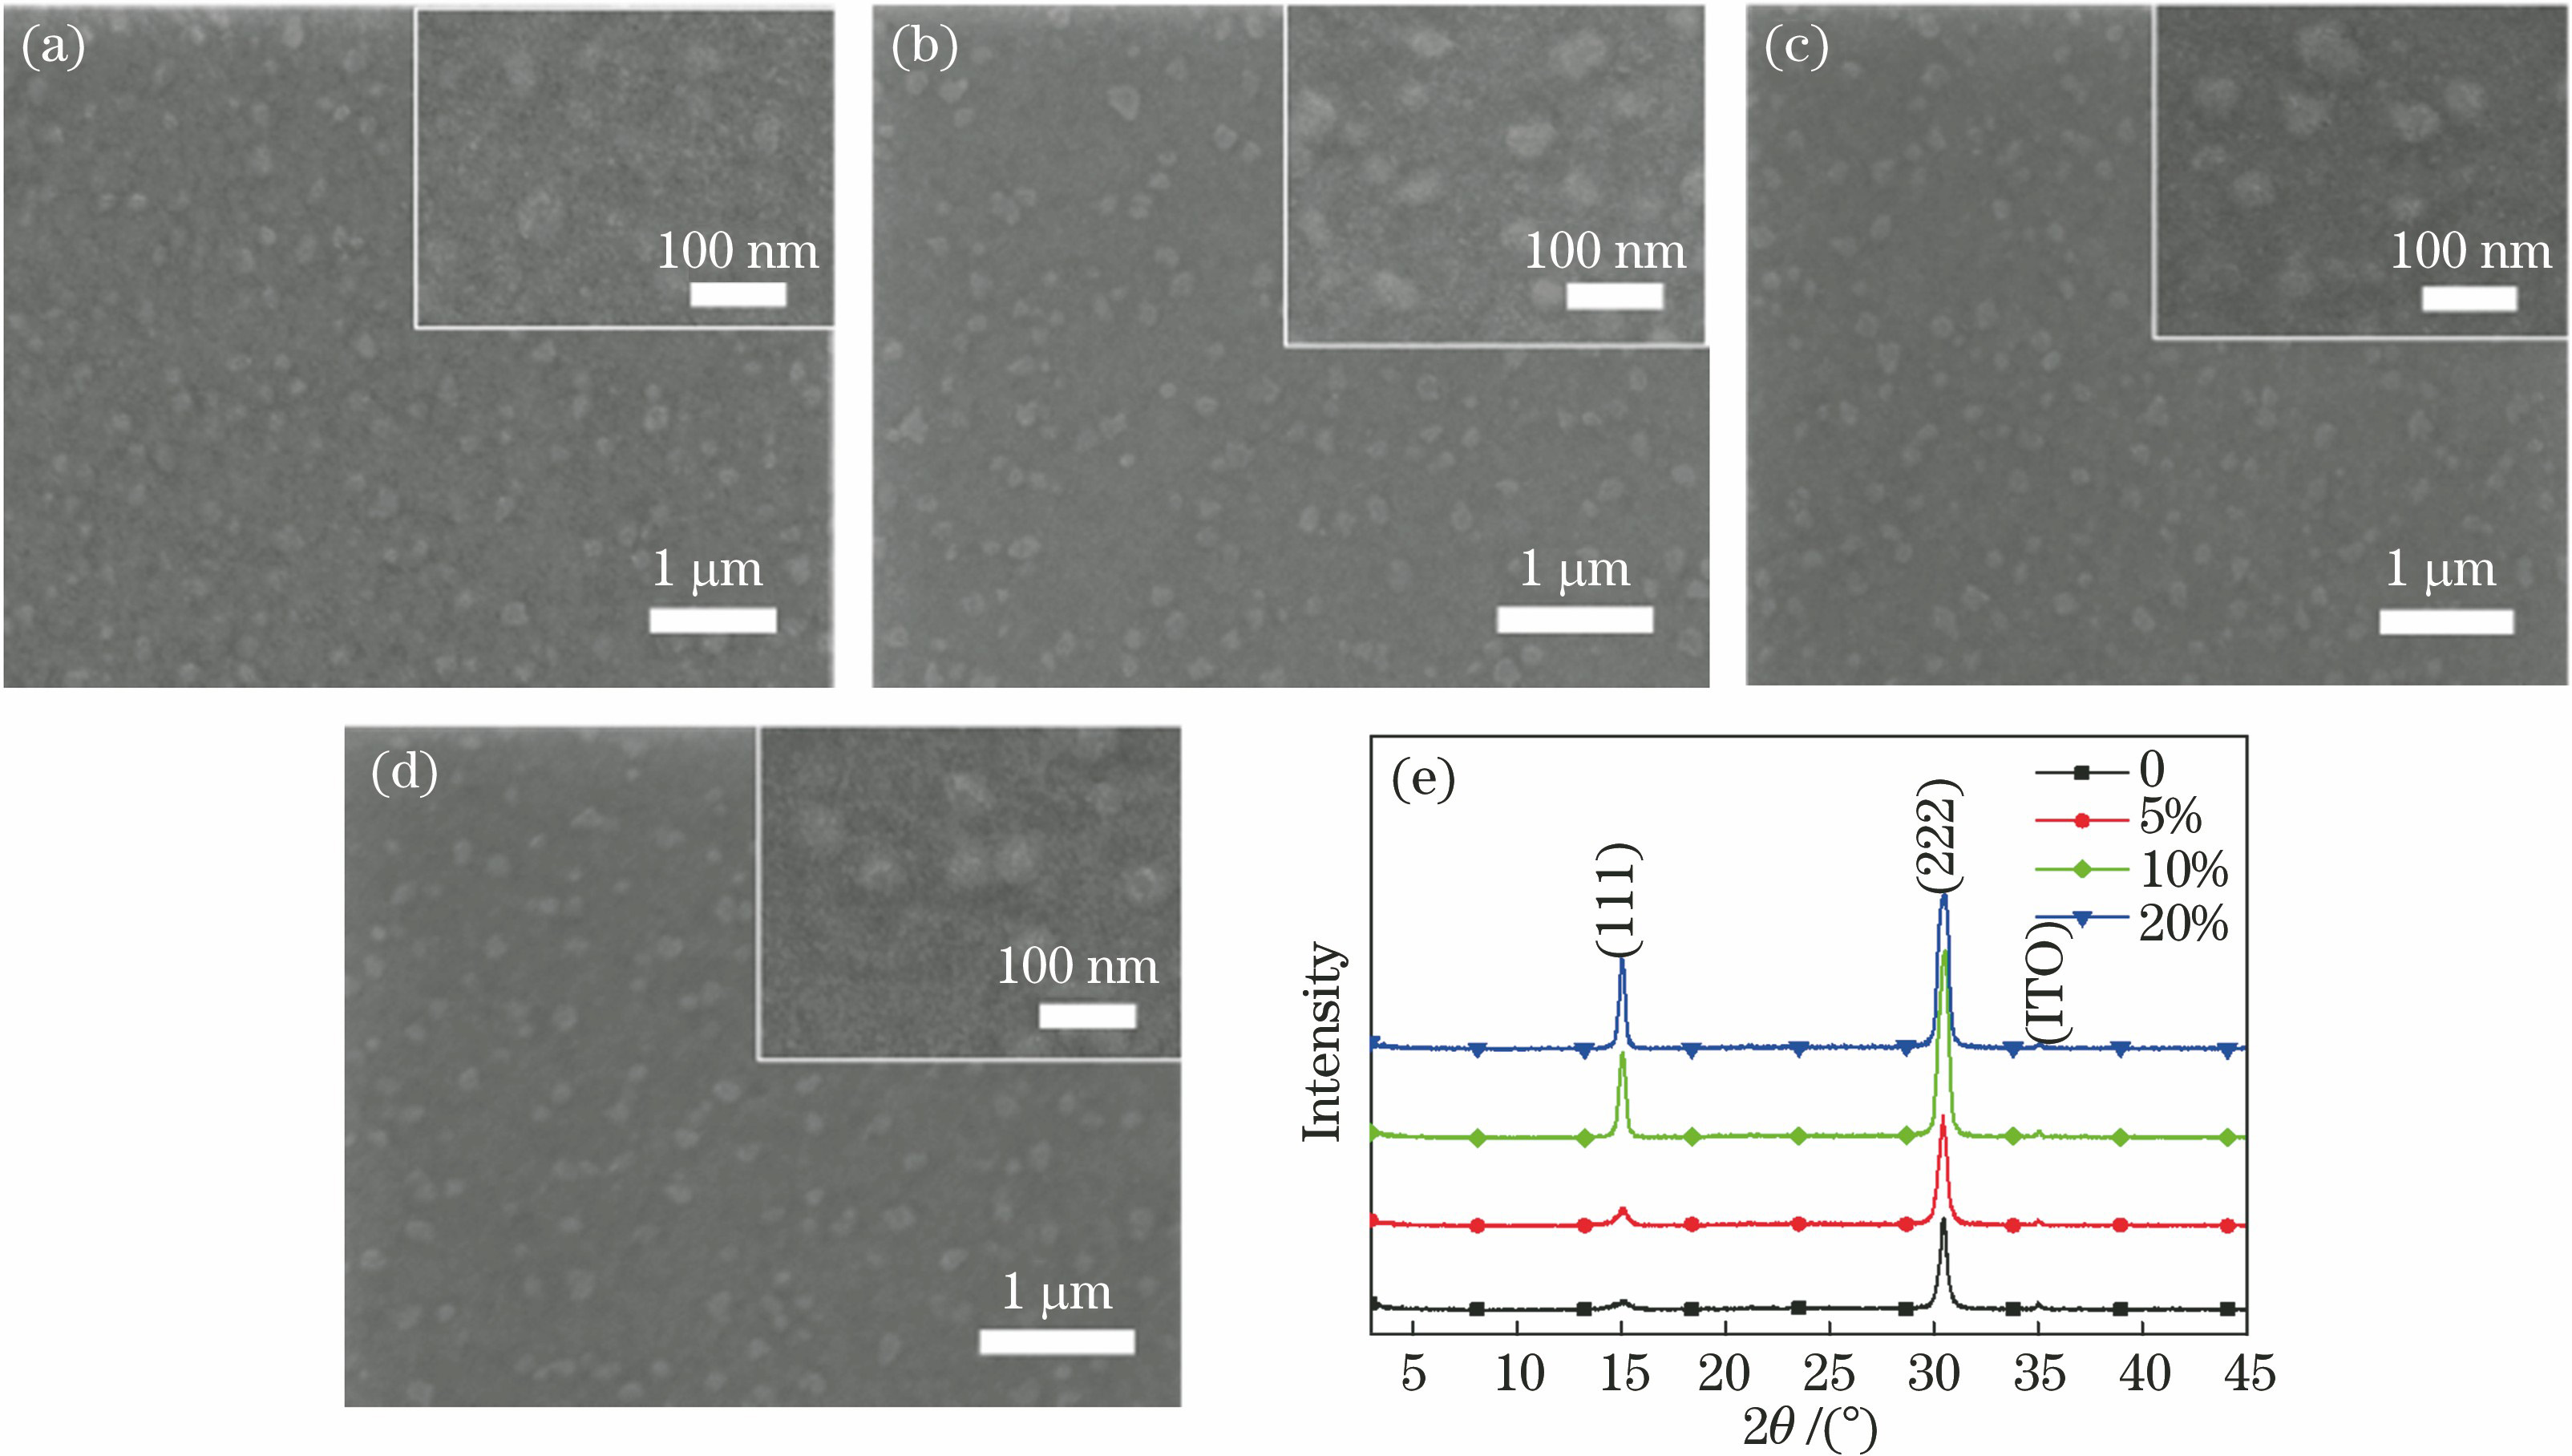 Morphologies and XRD patterns of perovskite films with different doping concentrations of HPA, where the insets are high-resolution SEM images. (a) Doping concentration of HPA is 0; (b) doping concentration of HPA is 5%; (c) doping concentration of HPA is 10%; (d) doping concentration of HPA is 20%; (e) XRD patterns